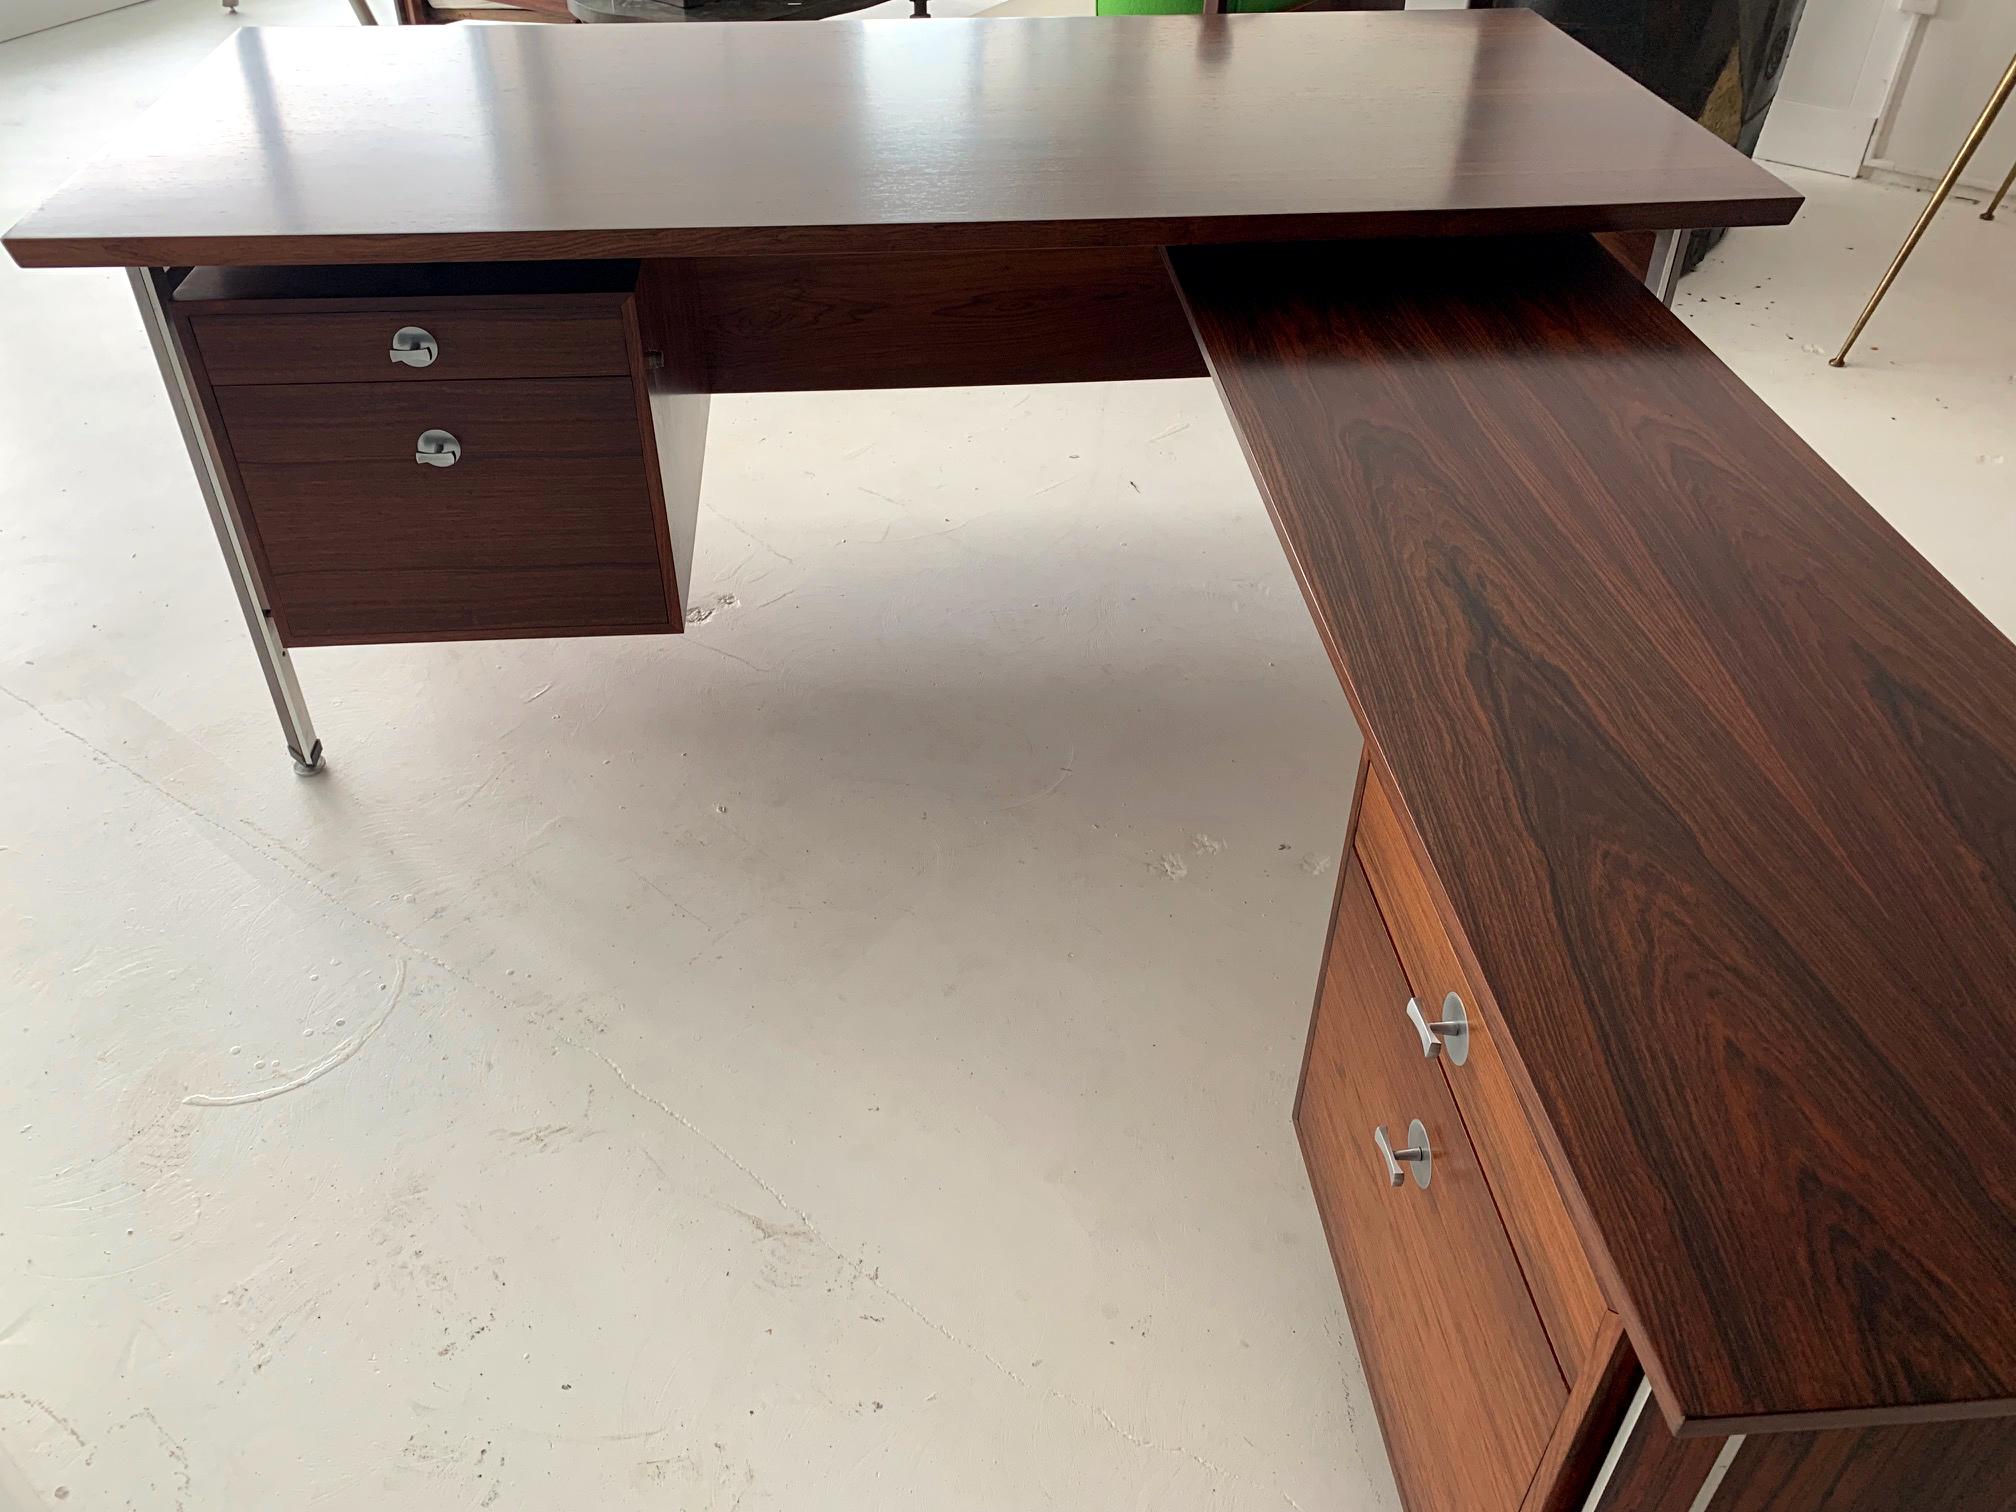 An impressive L shape executive desk designed by Finn Juhl as Diplomat series for Frances and Son, circa 1960s. Constructed with matching rosewood veneer with dramatic grains and aluminum frame, the desk features an adjustable L return on the right